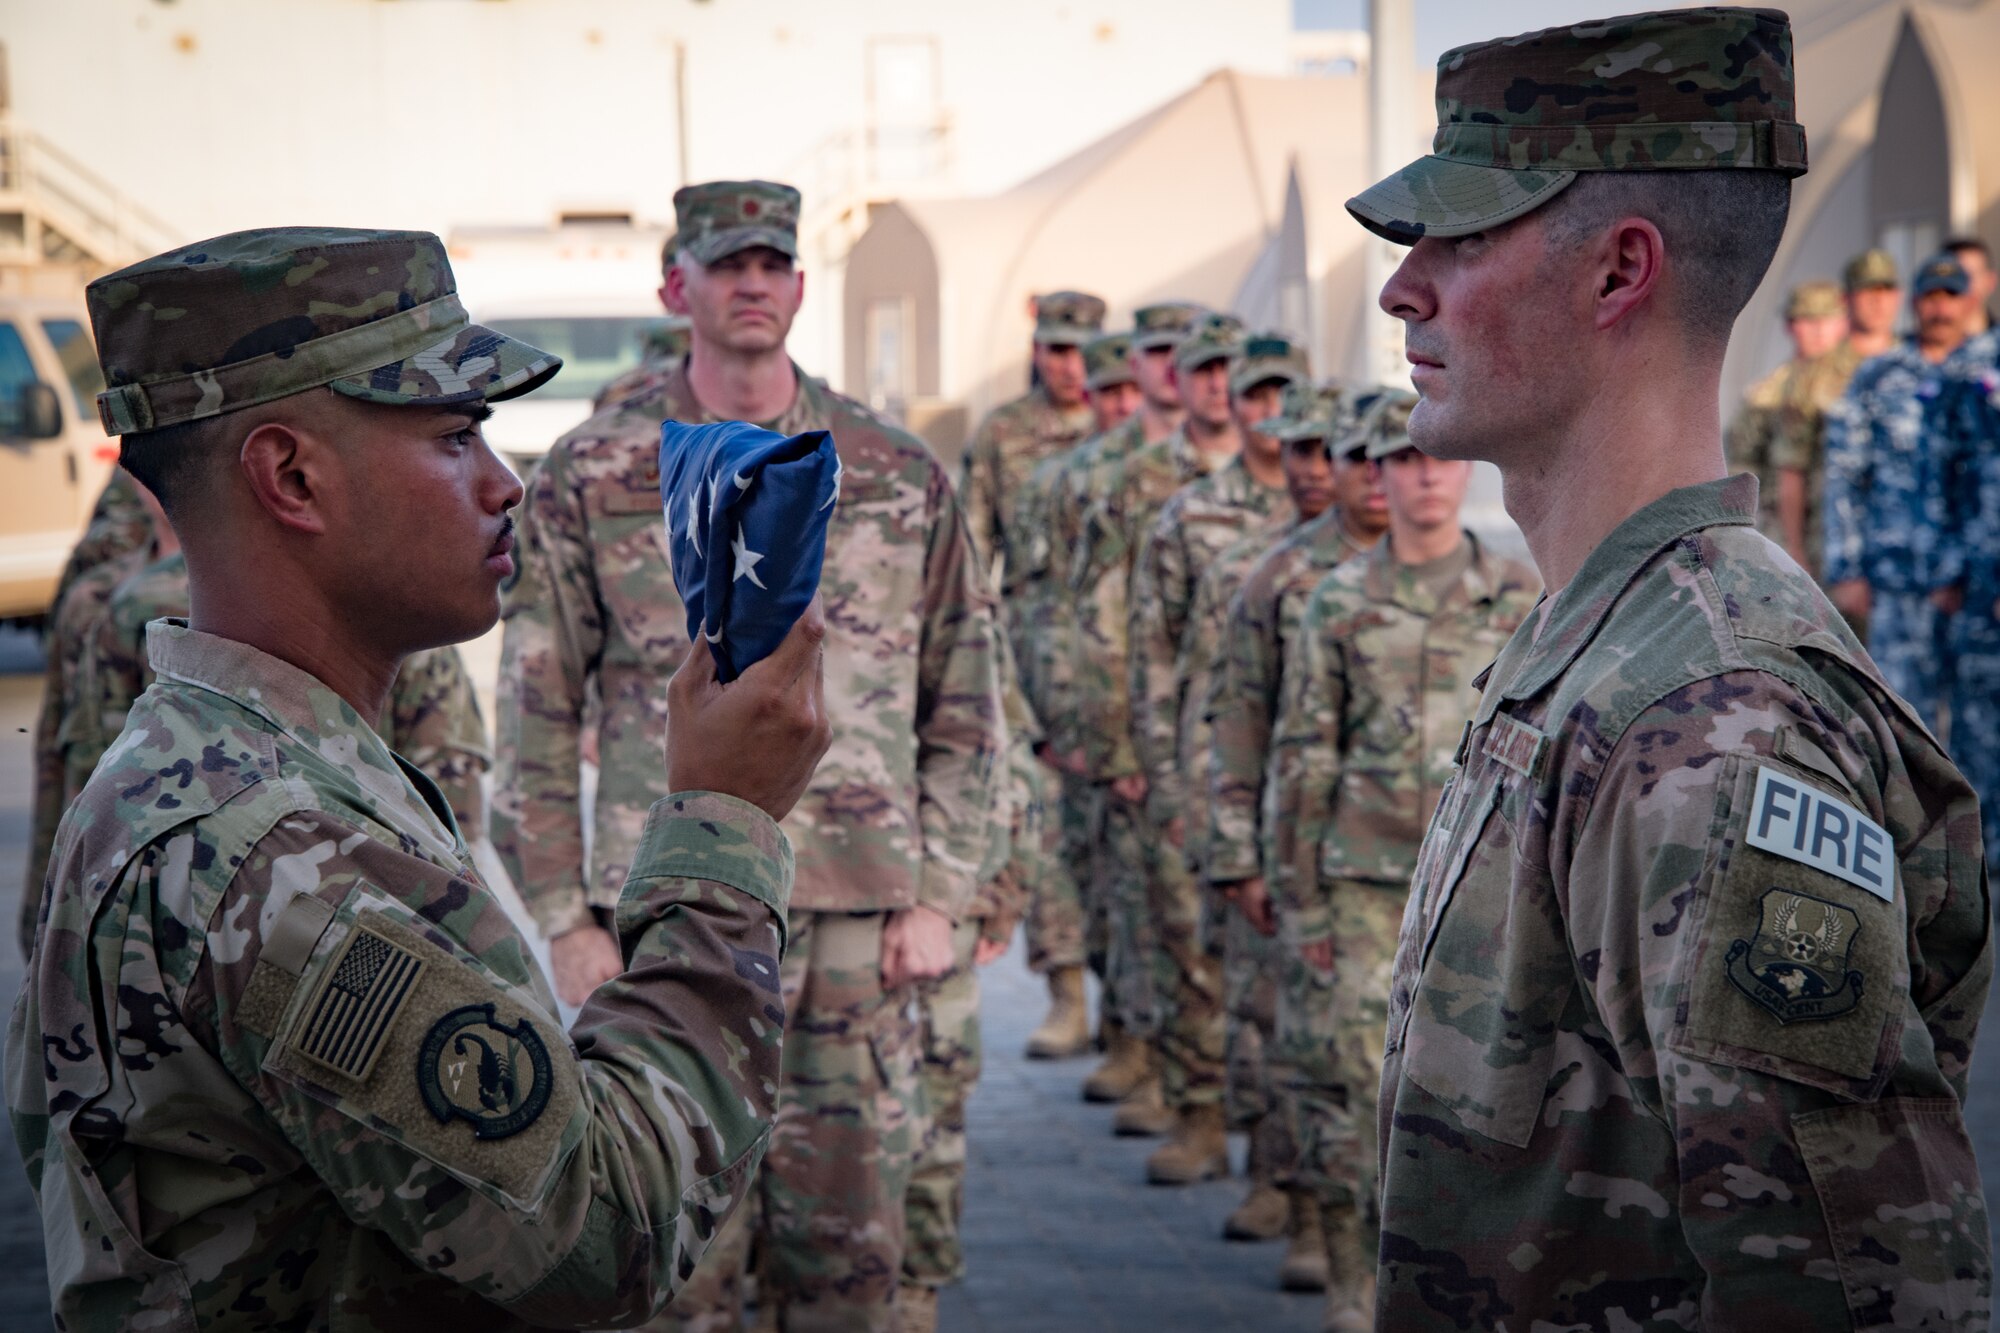 U.S. Airmen, Soldiers and coalition partners from the from the 380th Air Expeditionary Wing honored first responders who died in the line of duty during the terrorist attack on the World Trade Center during a retreat ceremony at Al Dhafra Air Base, United Arab Emirates, Sept. 11, 2018.  (U.S. Air Force photo by Tech. Sgt. Nieko Carzis)